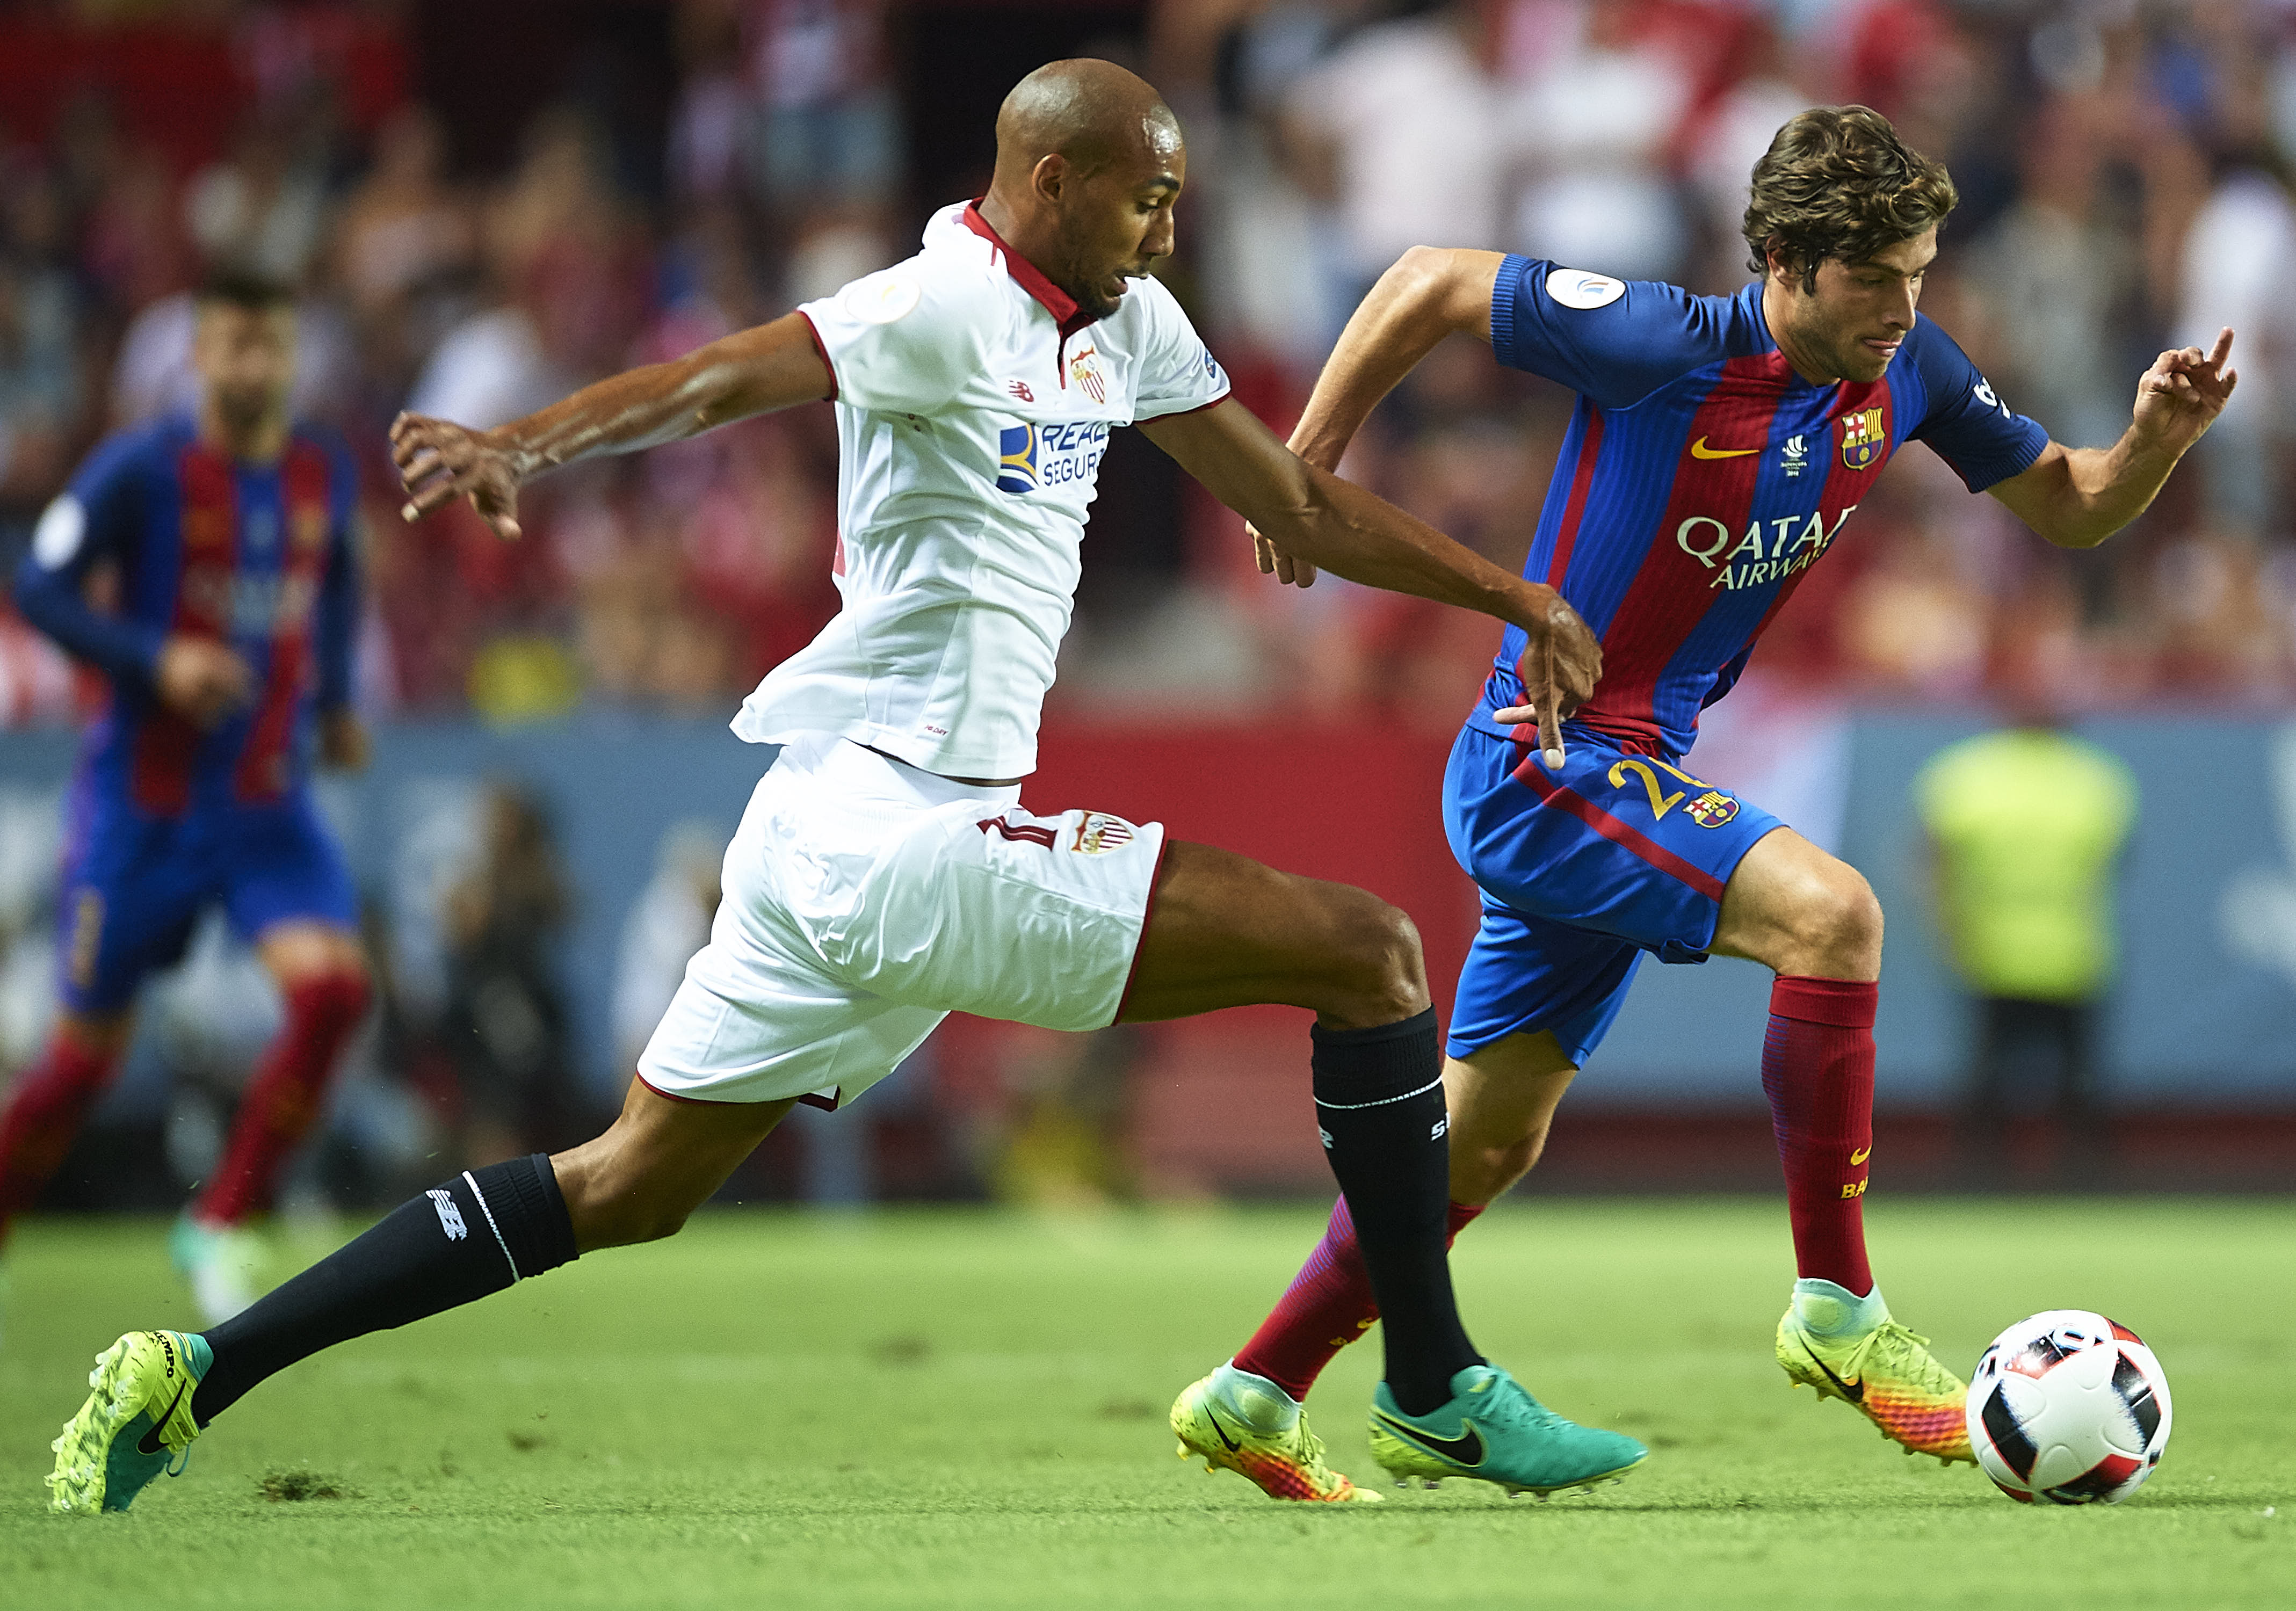 SEVILLE, SPAIN - AUGUST 14: Sergio Roberto of FC Barcelona (R) being followed by Steven N'Zonzi of Sevilla FC (L) during the match between Sevilla FC vs FC Barcelona as part of the Spanish Super Cup Final 1st Leg at Estadio Ramon Sanchez Pizjuan on August 14, 2016 in Seville, Spain. (Photo by Aitor Alcalde/Getty Images)